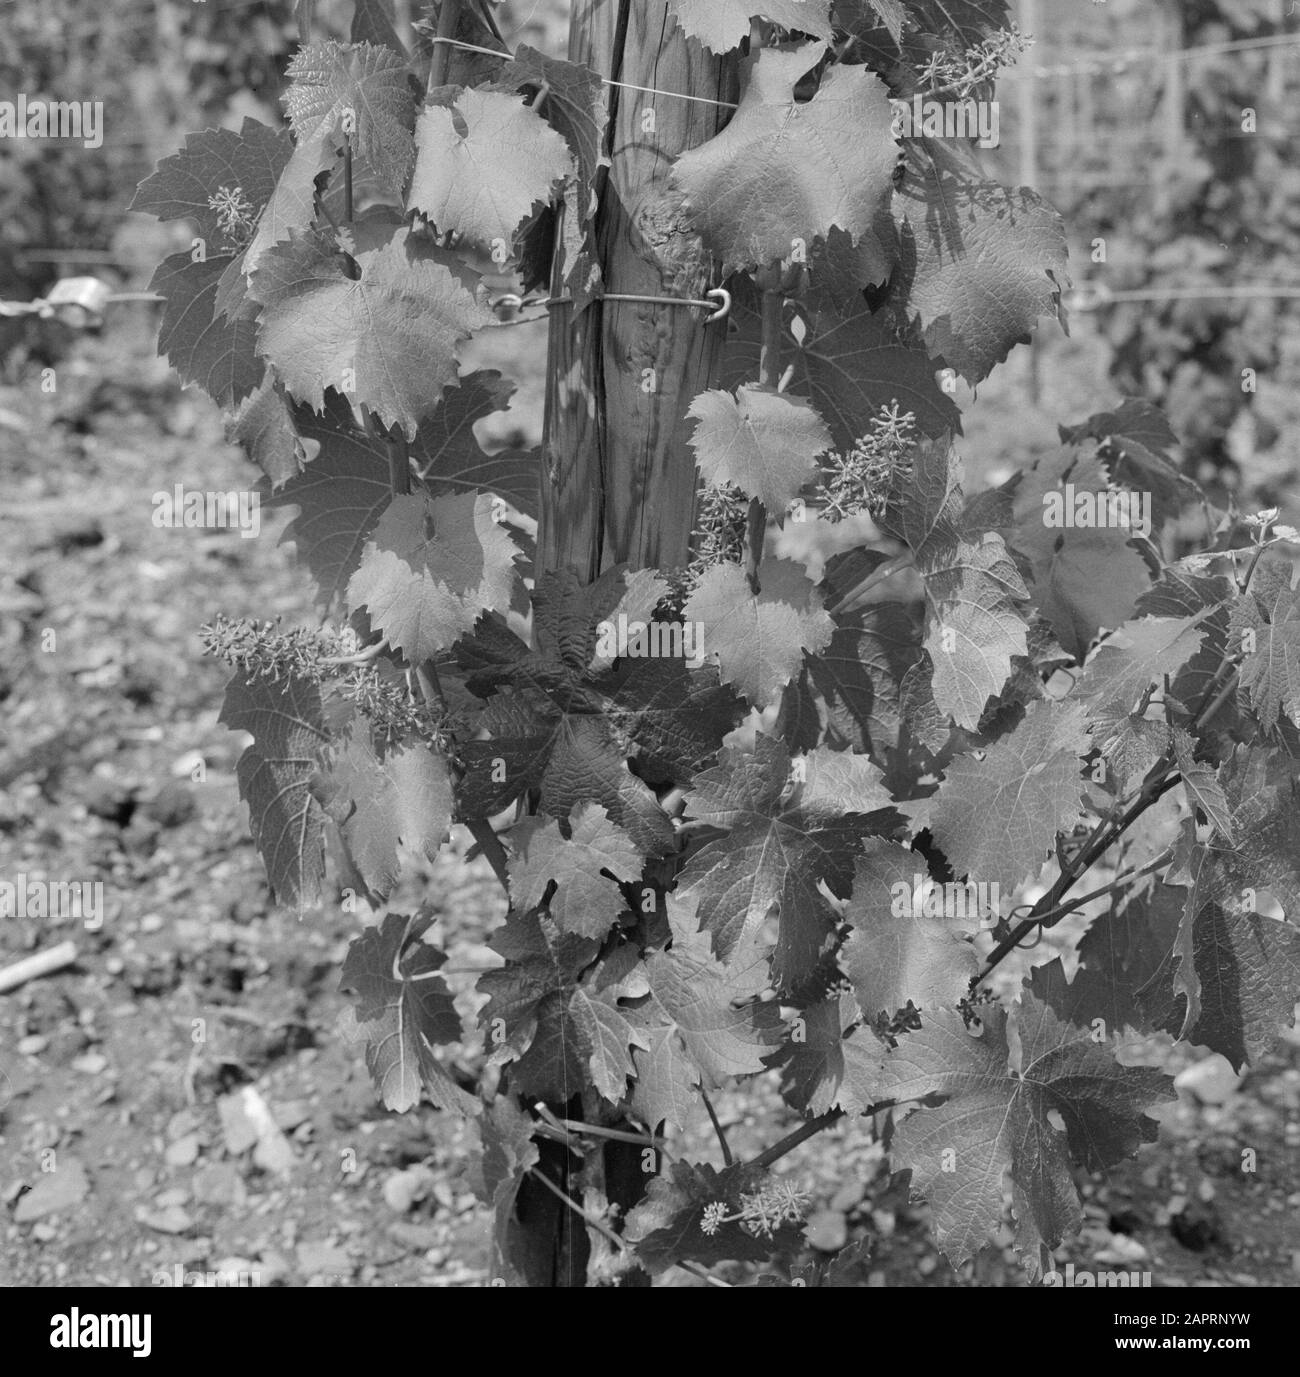 Moselle: Viticulture  Grapes with flower buds of presumably Riesling grapes Date: 1959 Location: Germany, Rhineland-Palatinate, Wehlen, West Germany Keywords: grapes, viticulture Stock Photo